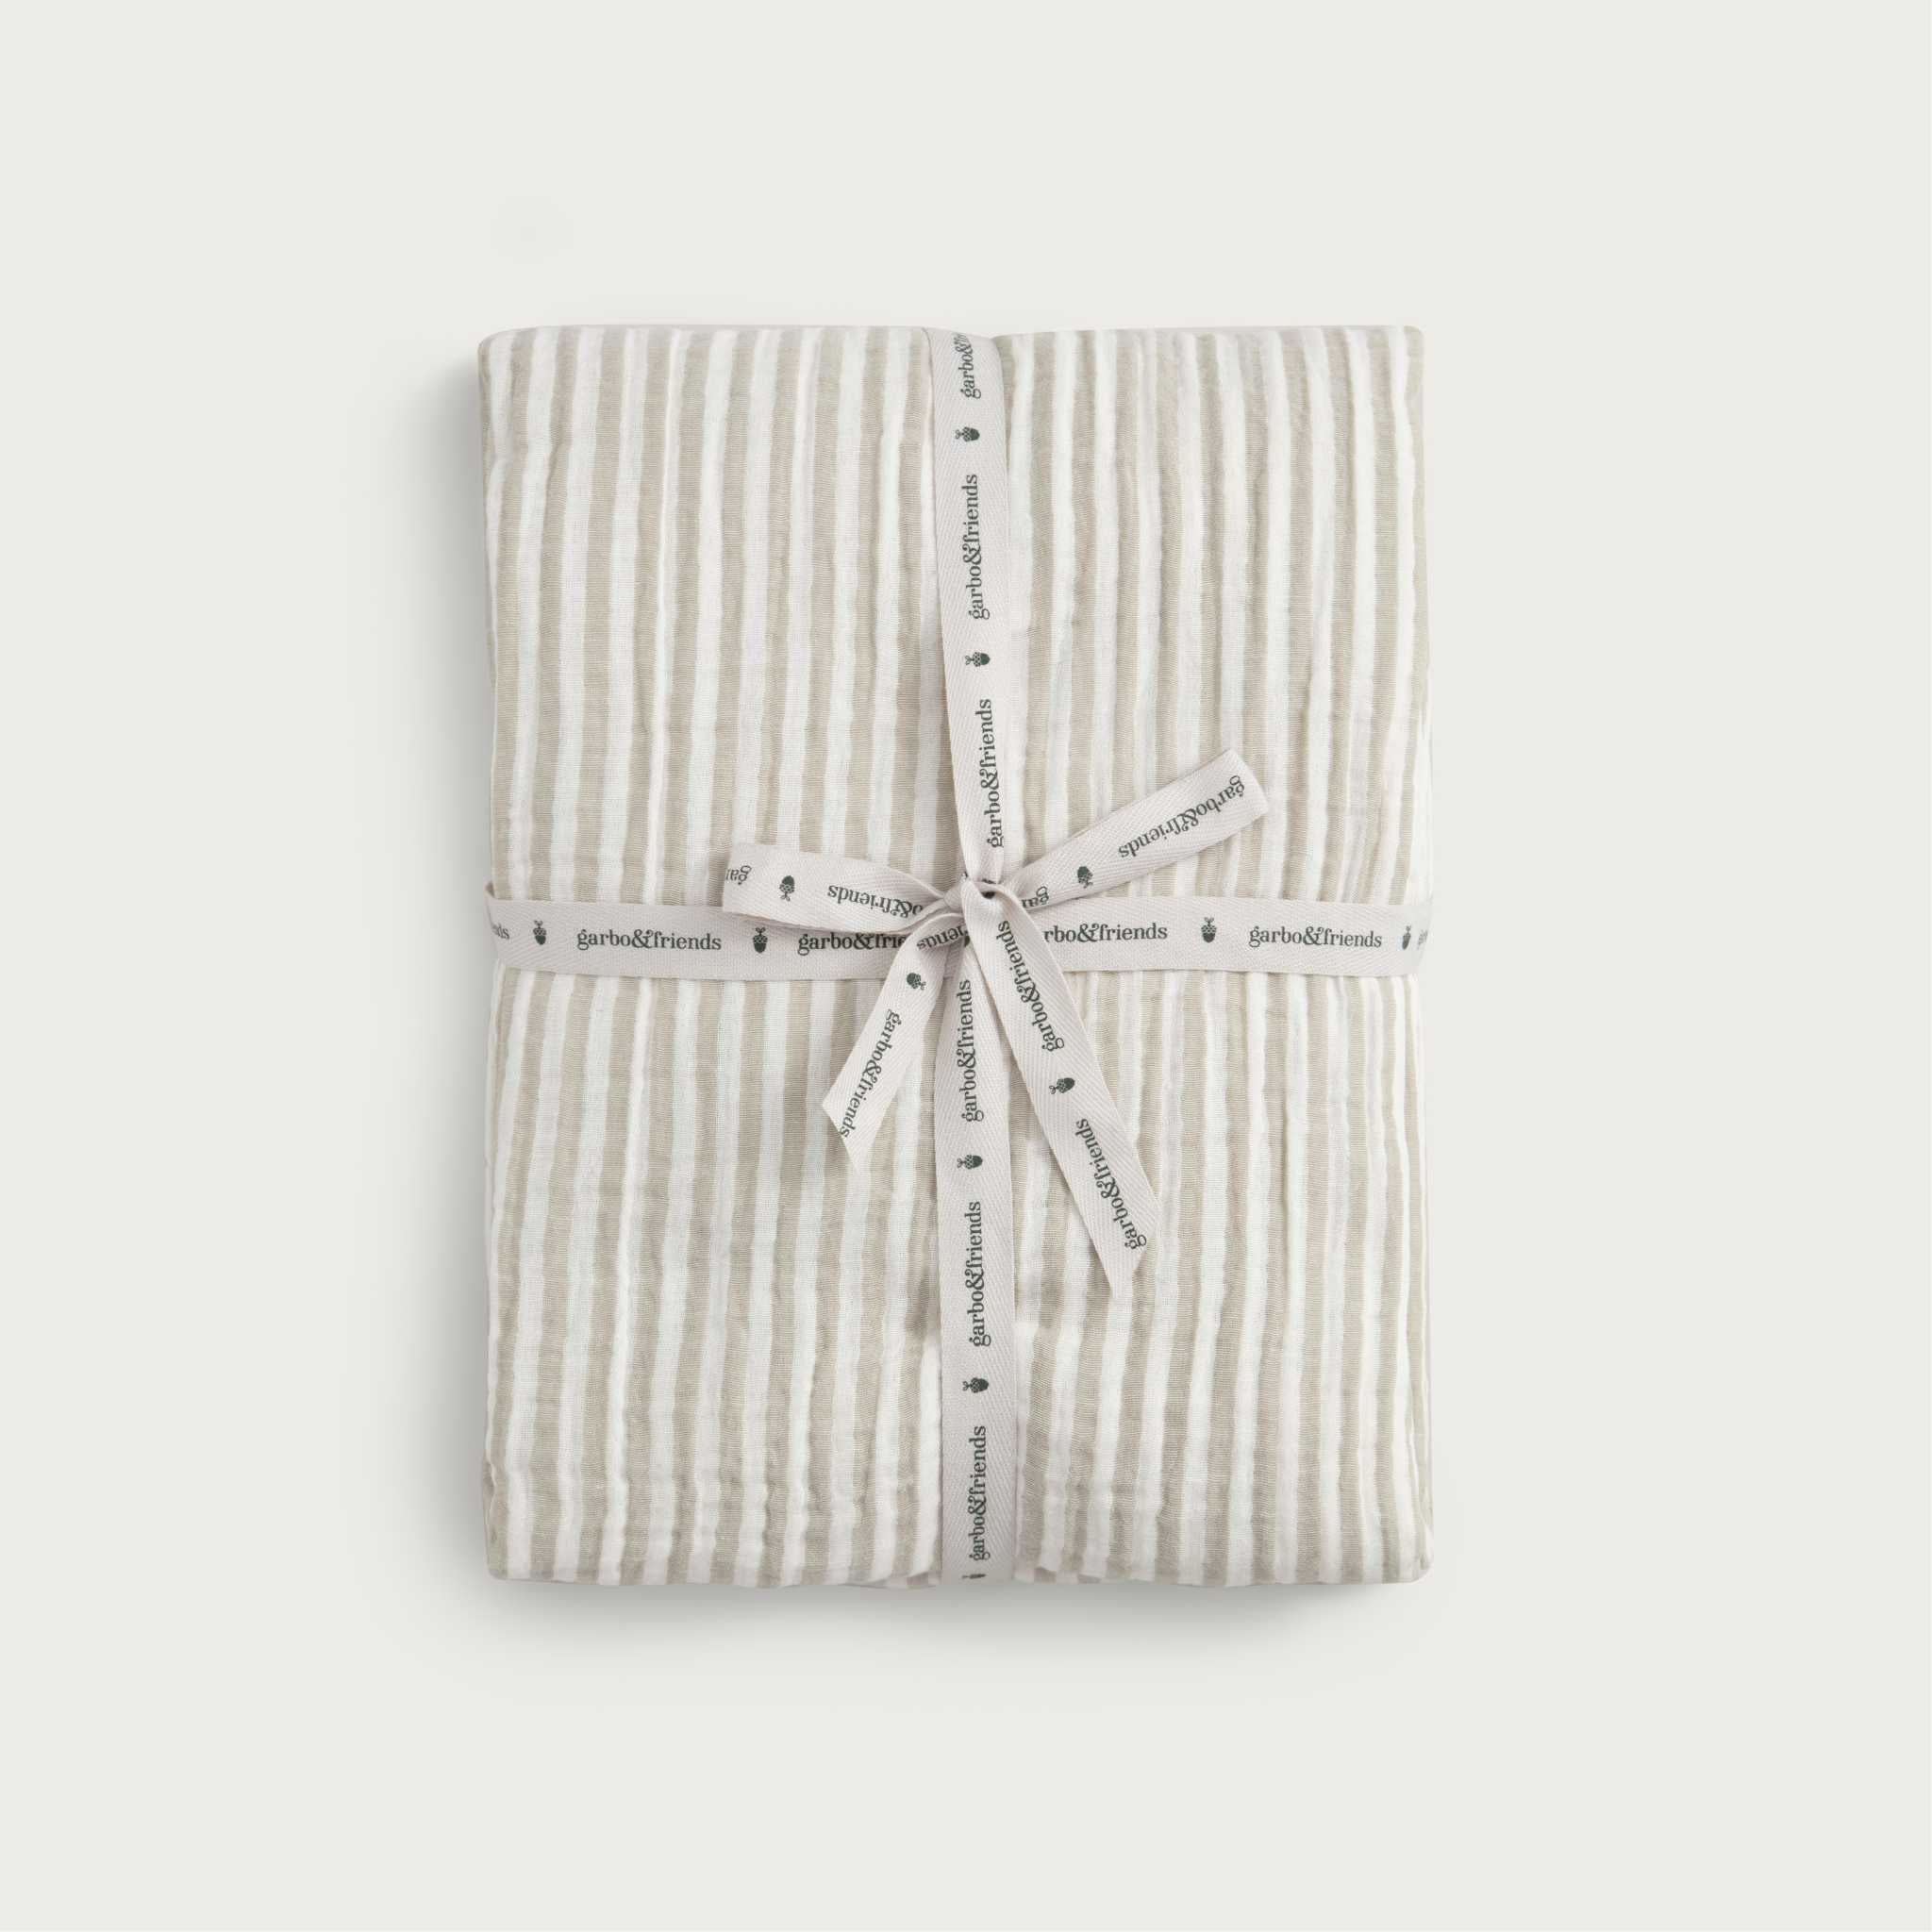 Garbo and Friends Stripe Anjou Muslin Cot Sheet - With Ribbon On Grey Background 